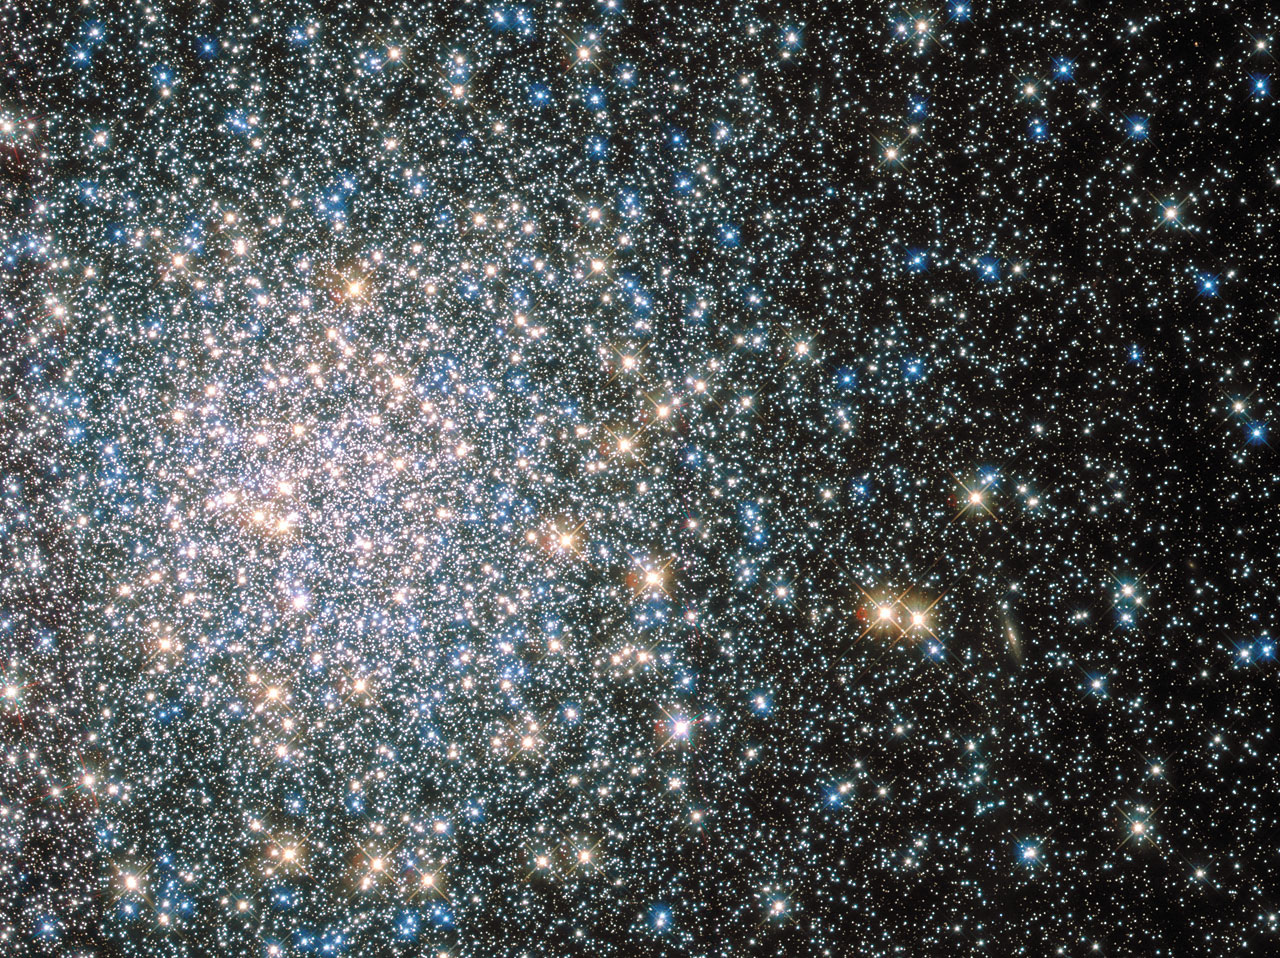 This sparkling jumble is Messier 5  a globular cluster consisting of hundreds of thousands of stars bound together by their collective gravity. But Messier 5 is no normal globular cluster. At 13 billion years old it dates back to close to the beginning of the Universe, which is some 13.8 billion years of age.